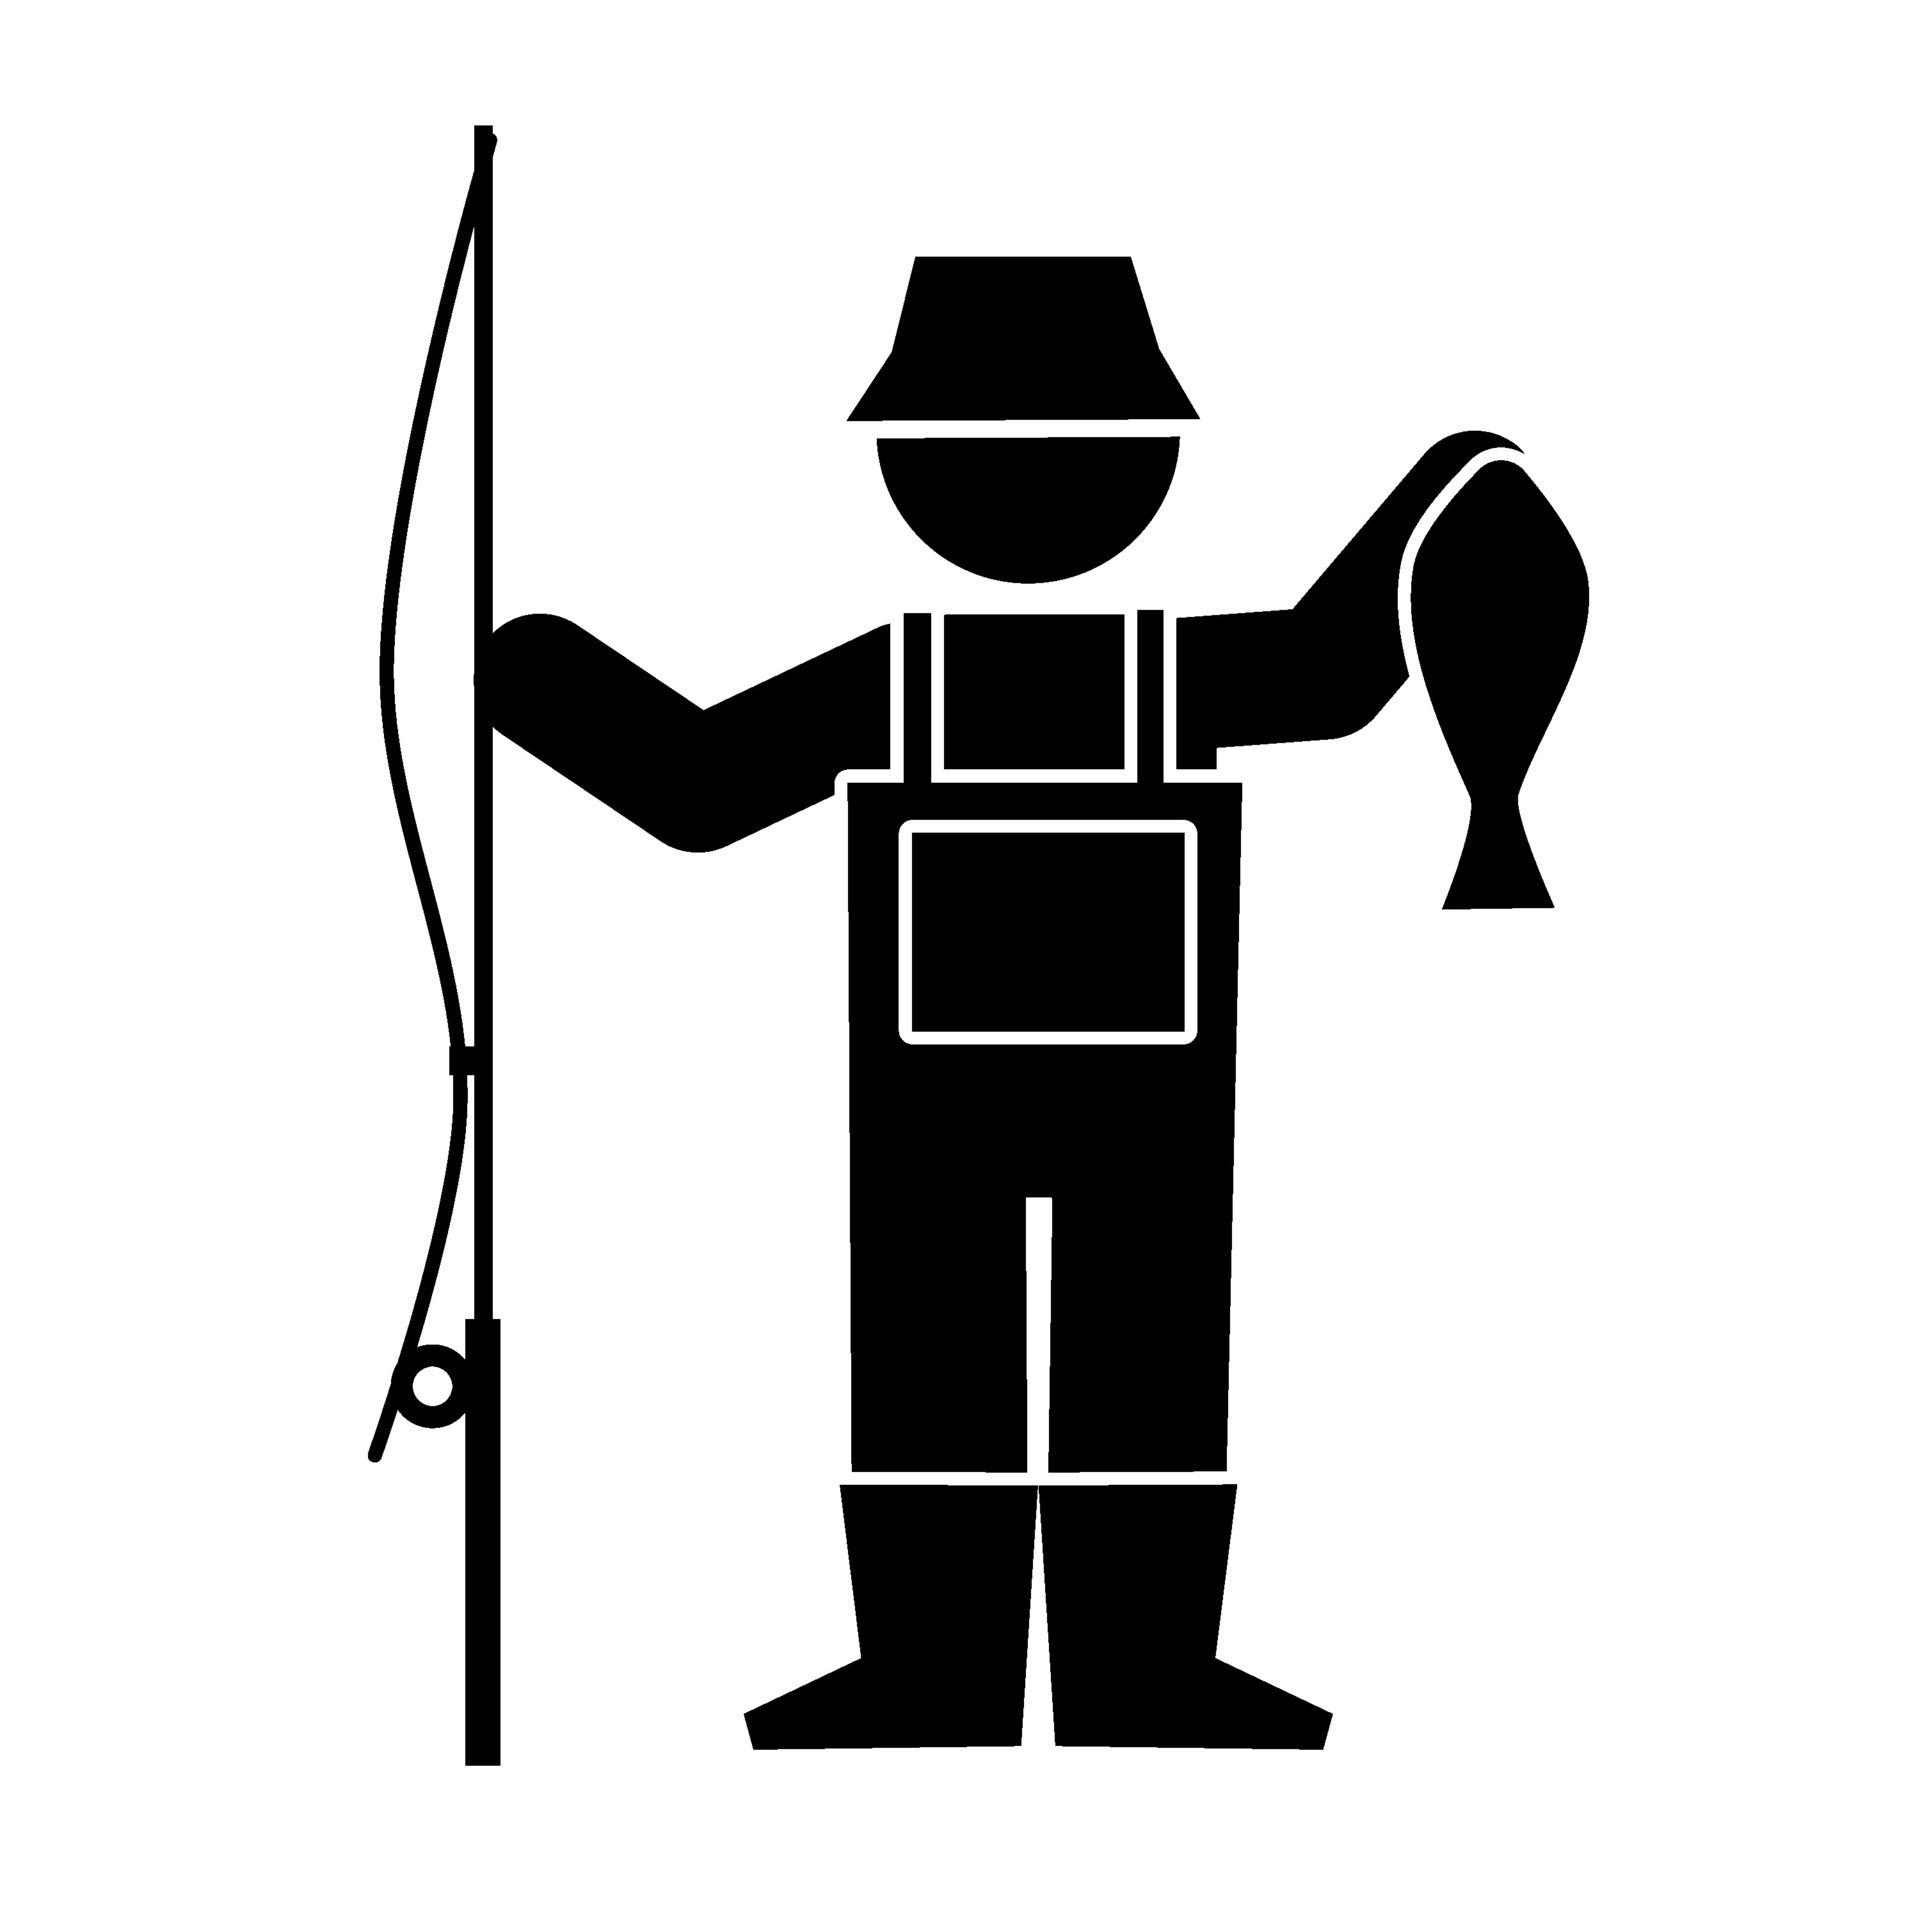 https://static.vecteezy.com/system/resources/previews/029/624/376/original/stick-figure-and-stick-man-silhouette-illustration-fisherman-fishing-free-vector.jpg